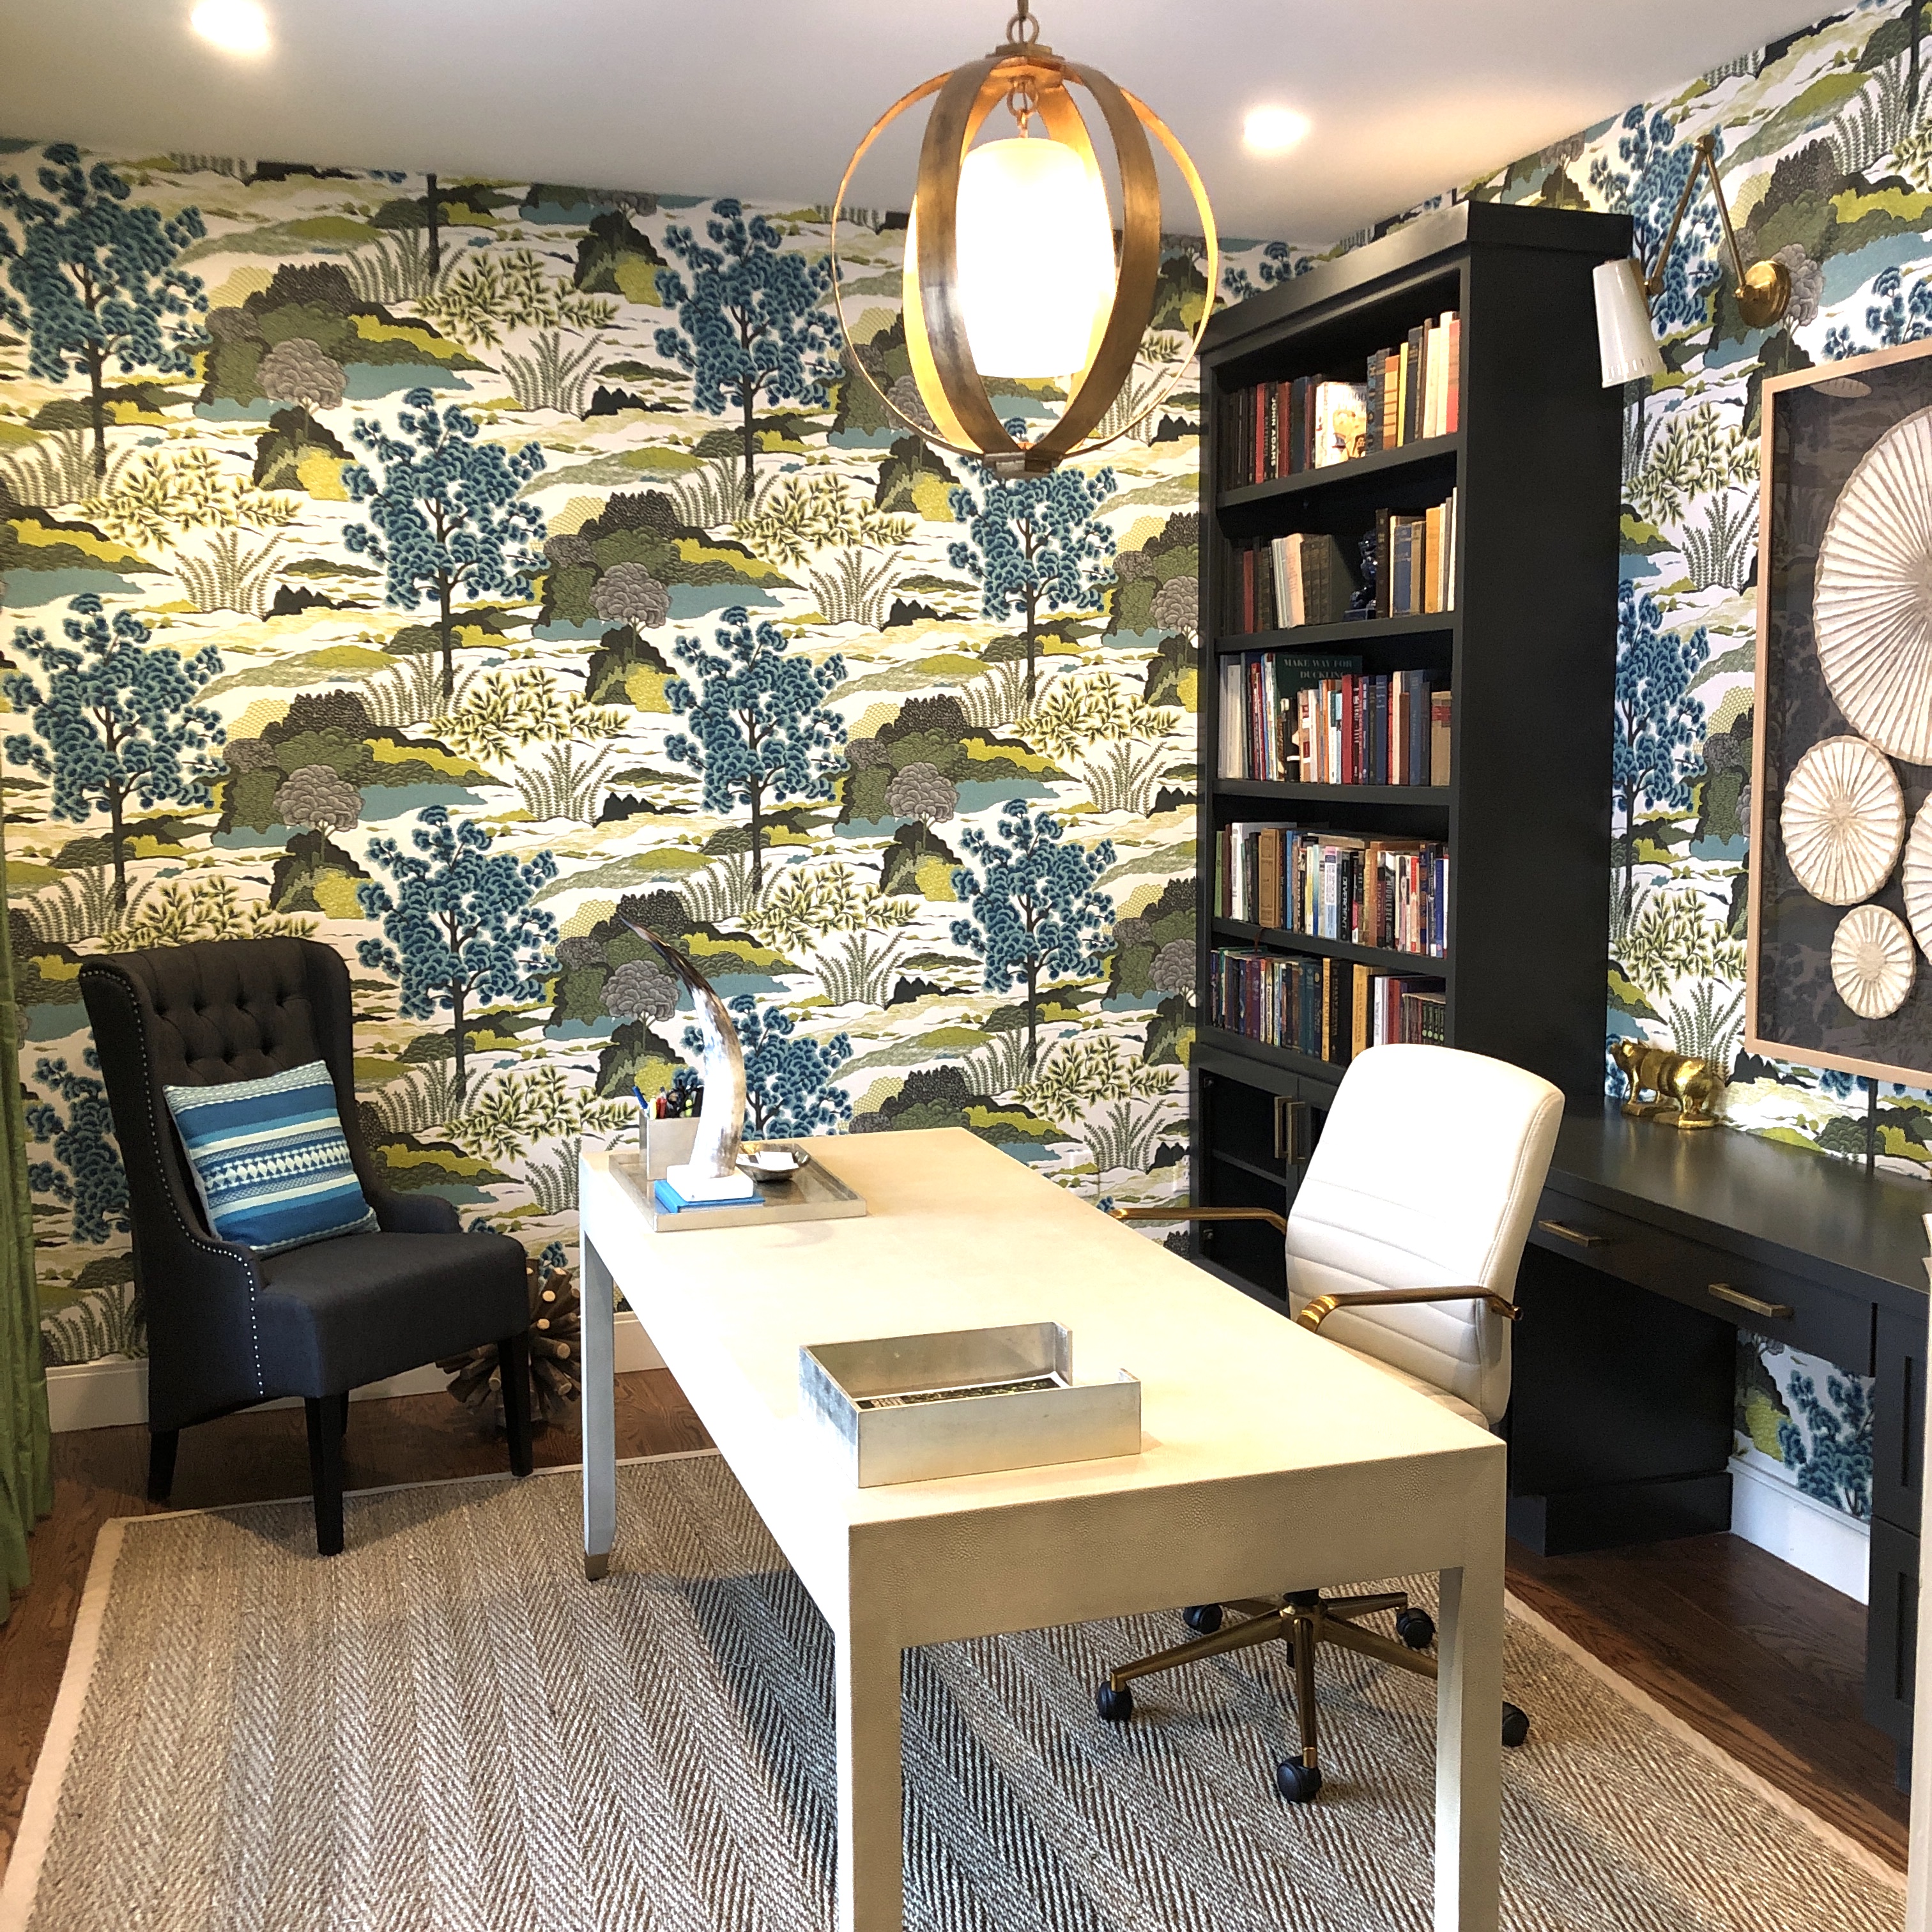 Contemporary Wallpaper Design for the Home Office - Larkin Painting Company